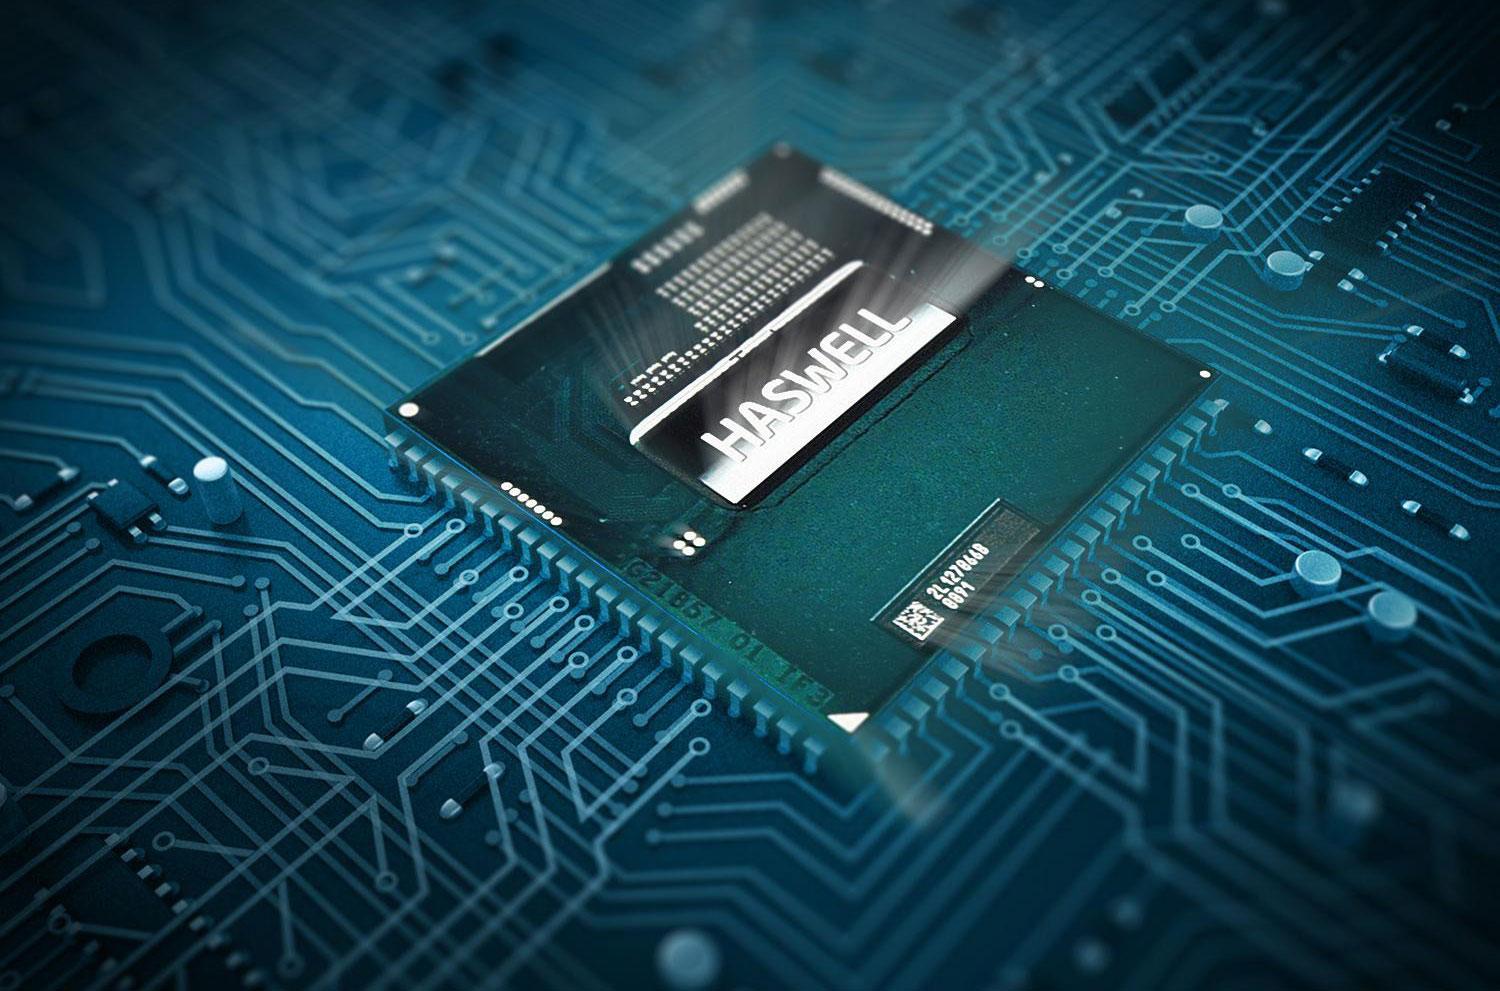 Report: Intel's Haswell processors are prone to overheating, run